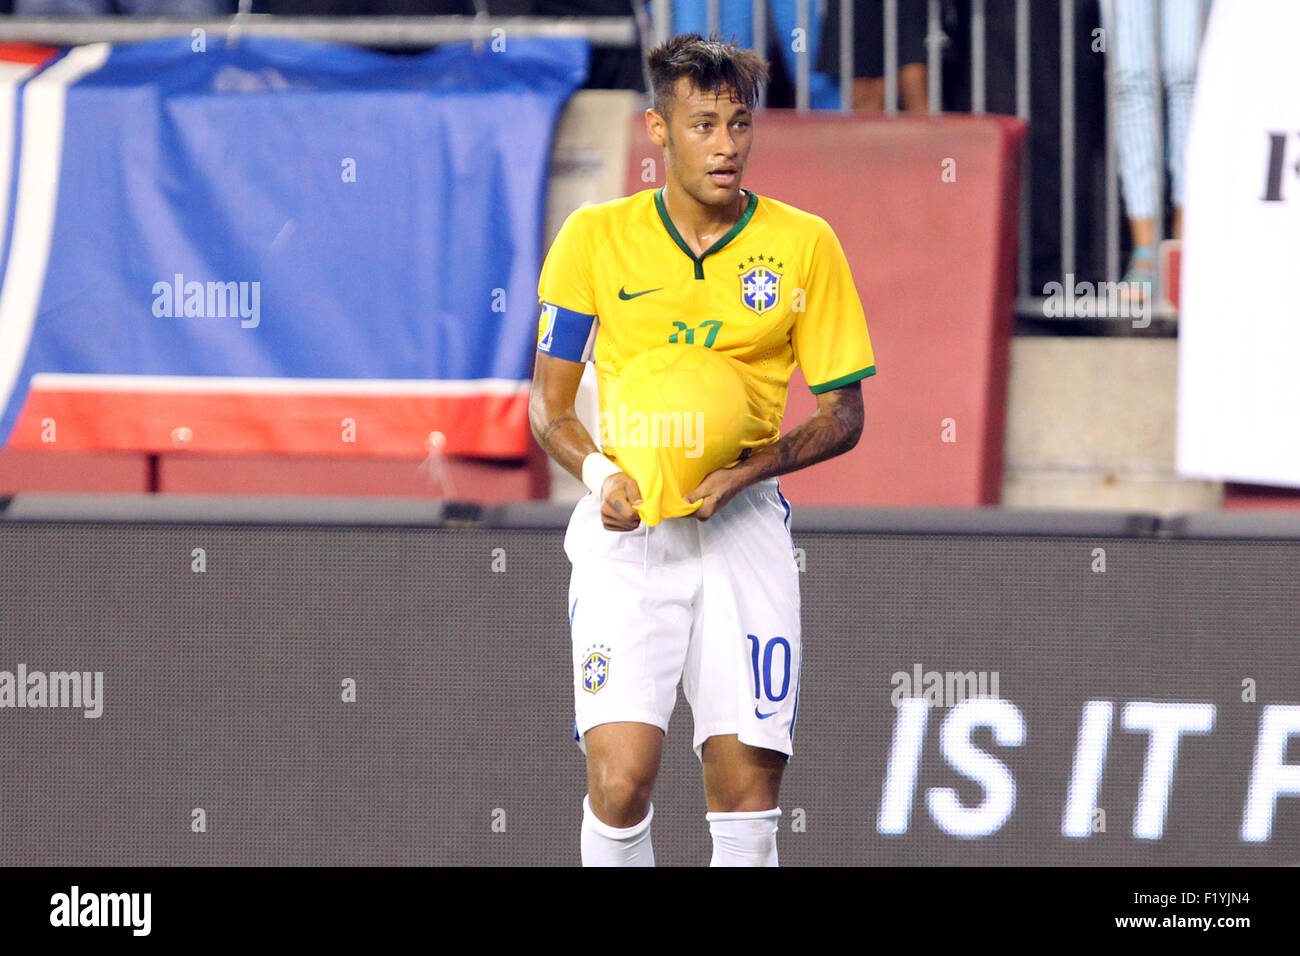 Foxborough, Massachusetts, USA. 8th Sep, 2015. Brazil forward Neymar (10) puts the ball under his jersey after scoring a goal in the second half of the Brazil and USA international friendly match at Gillette Stadium. Brazil defeated USA 4-1. Anthony Nesmith/Cal Sport Media Stock Photo